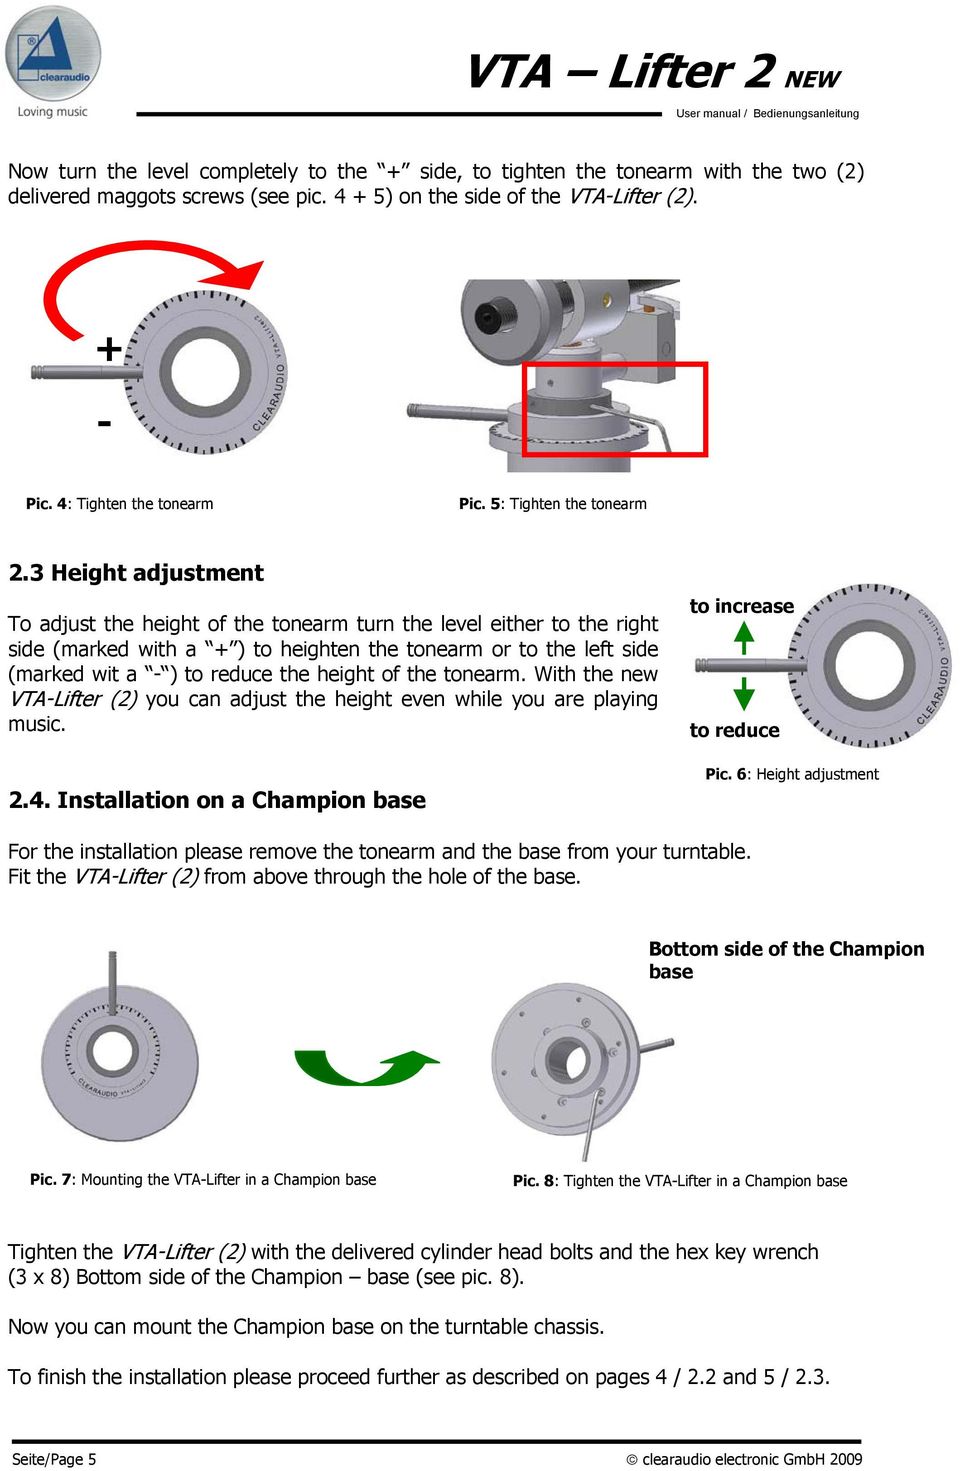 3 Height adjustment To adjust the height of the tonearm turn the level either to the right side (marked with a + ) to heighten the tonearm or to the left side (marked wit a - ) to reduce the height